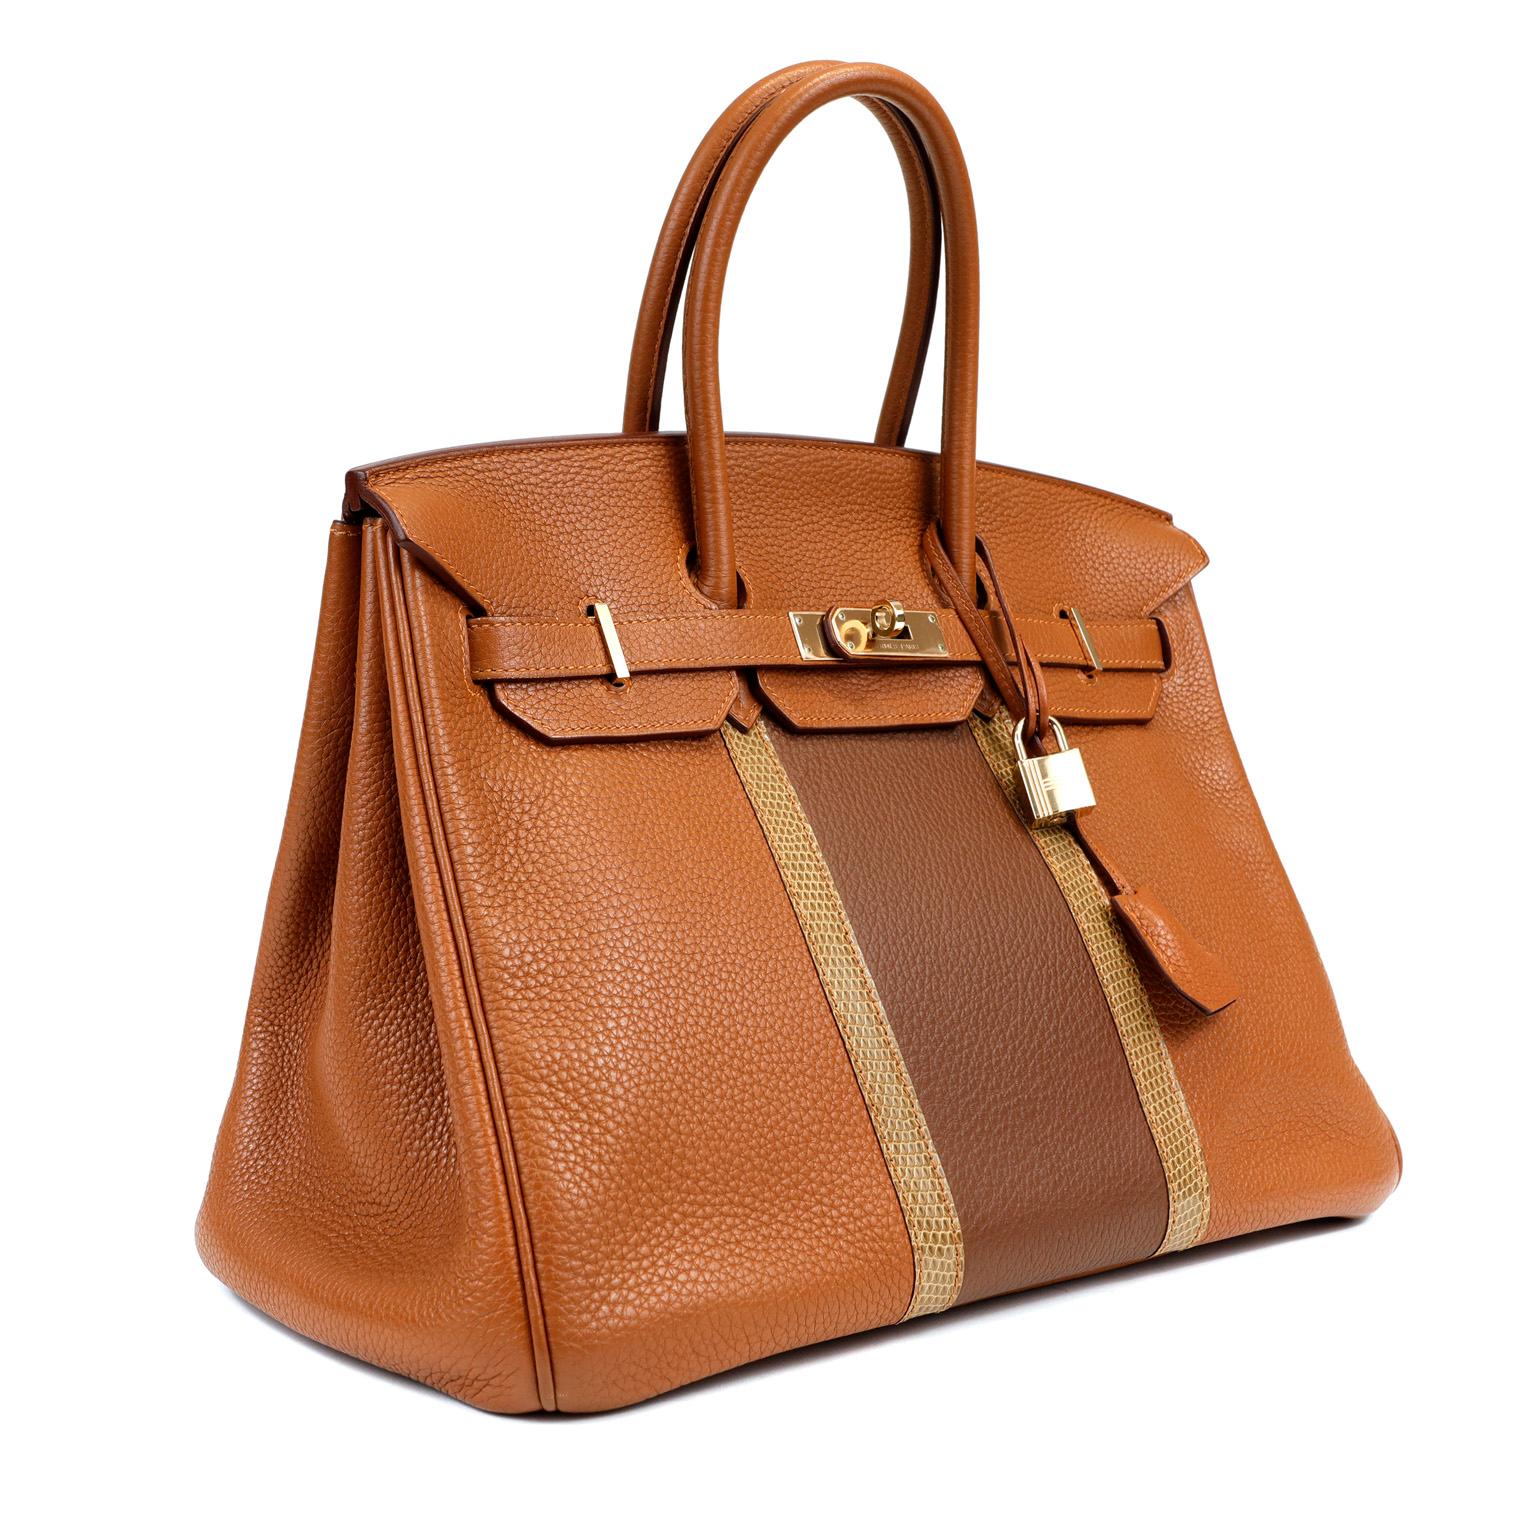 This authentic Hermès Tri Color Club 35 cm Birkin is in pristine condition with the protective plastic on the hardware.  Hand stitched by skilled craftsmen, wait lists of a year or more are common for the Hermès Birkin. The Club Birkin is a special